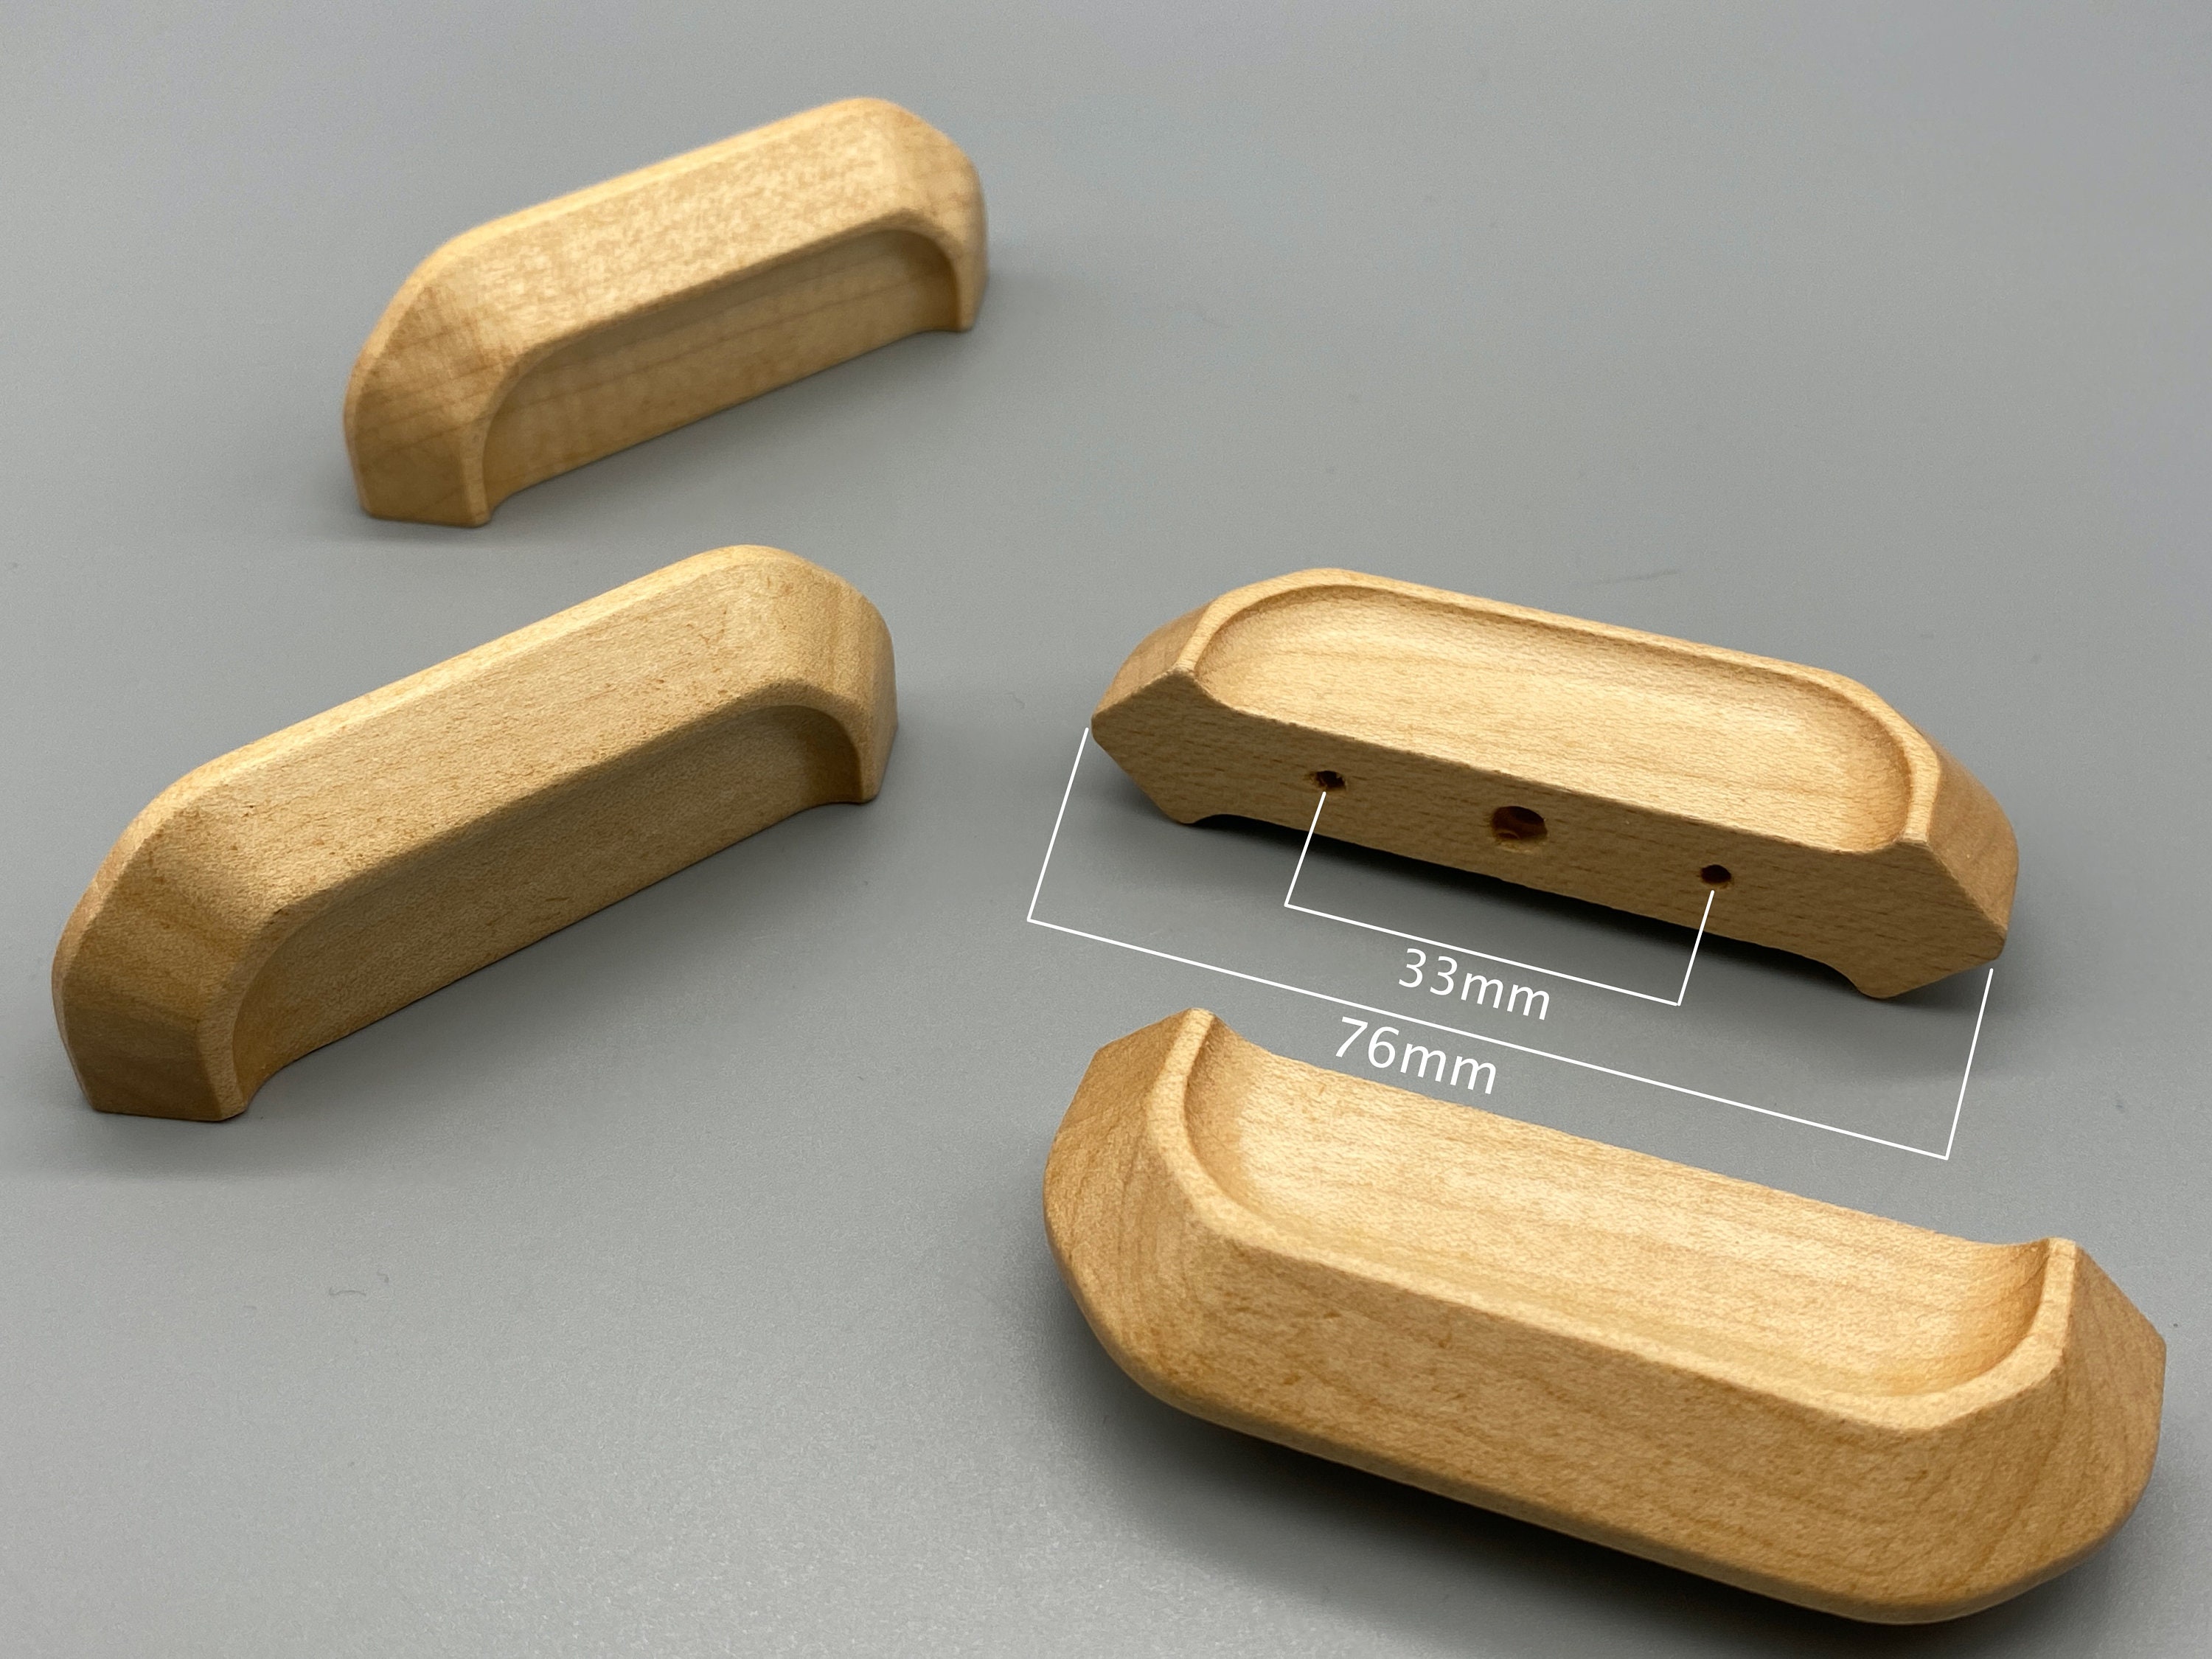 2x Natural Oak Wood D-Shaped Handles - Lacquered - 100mm (4'' inch) - Pre  Drilled